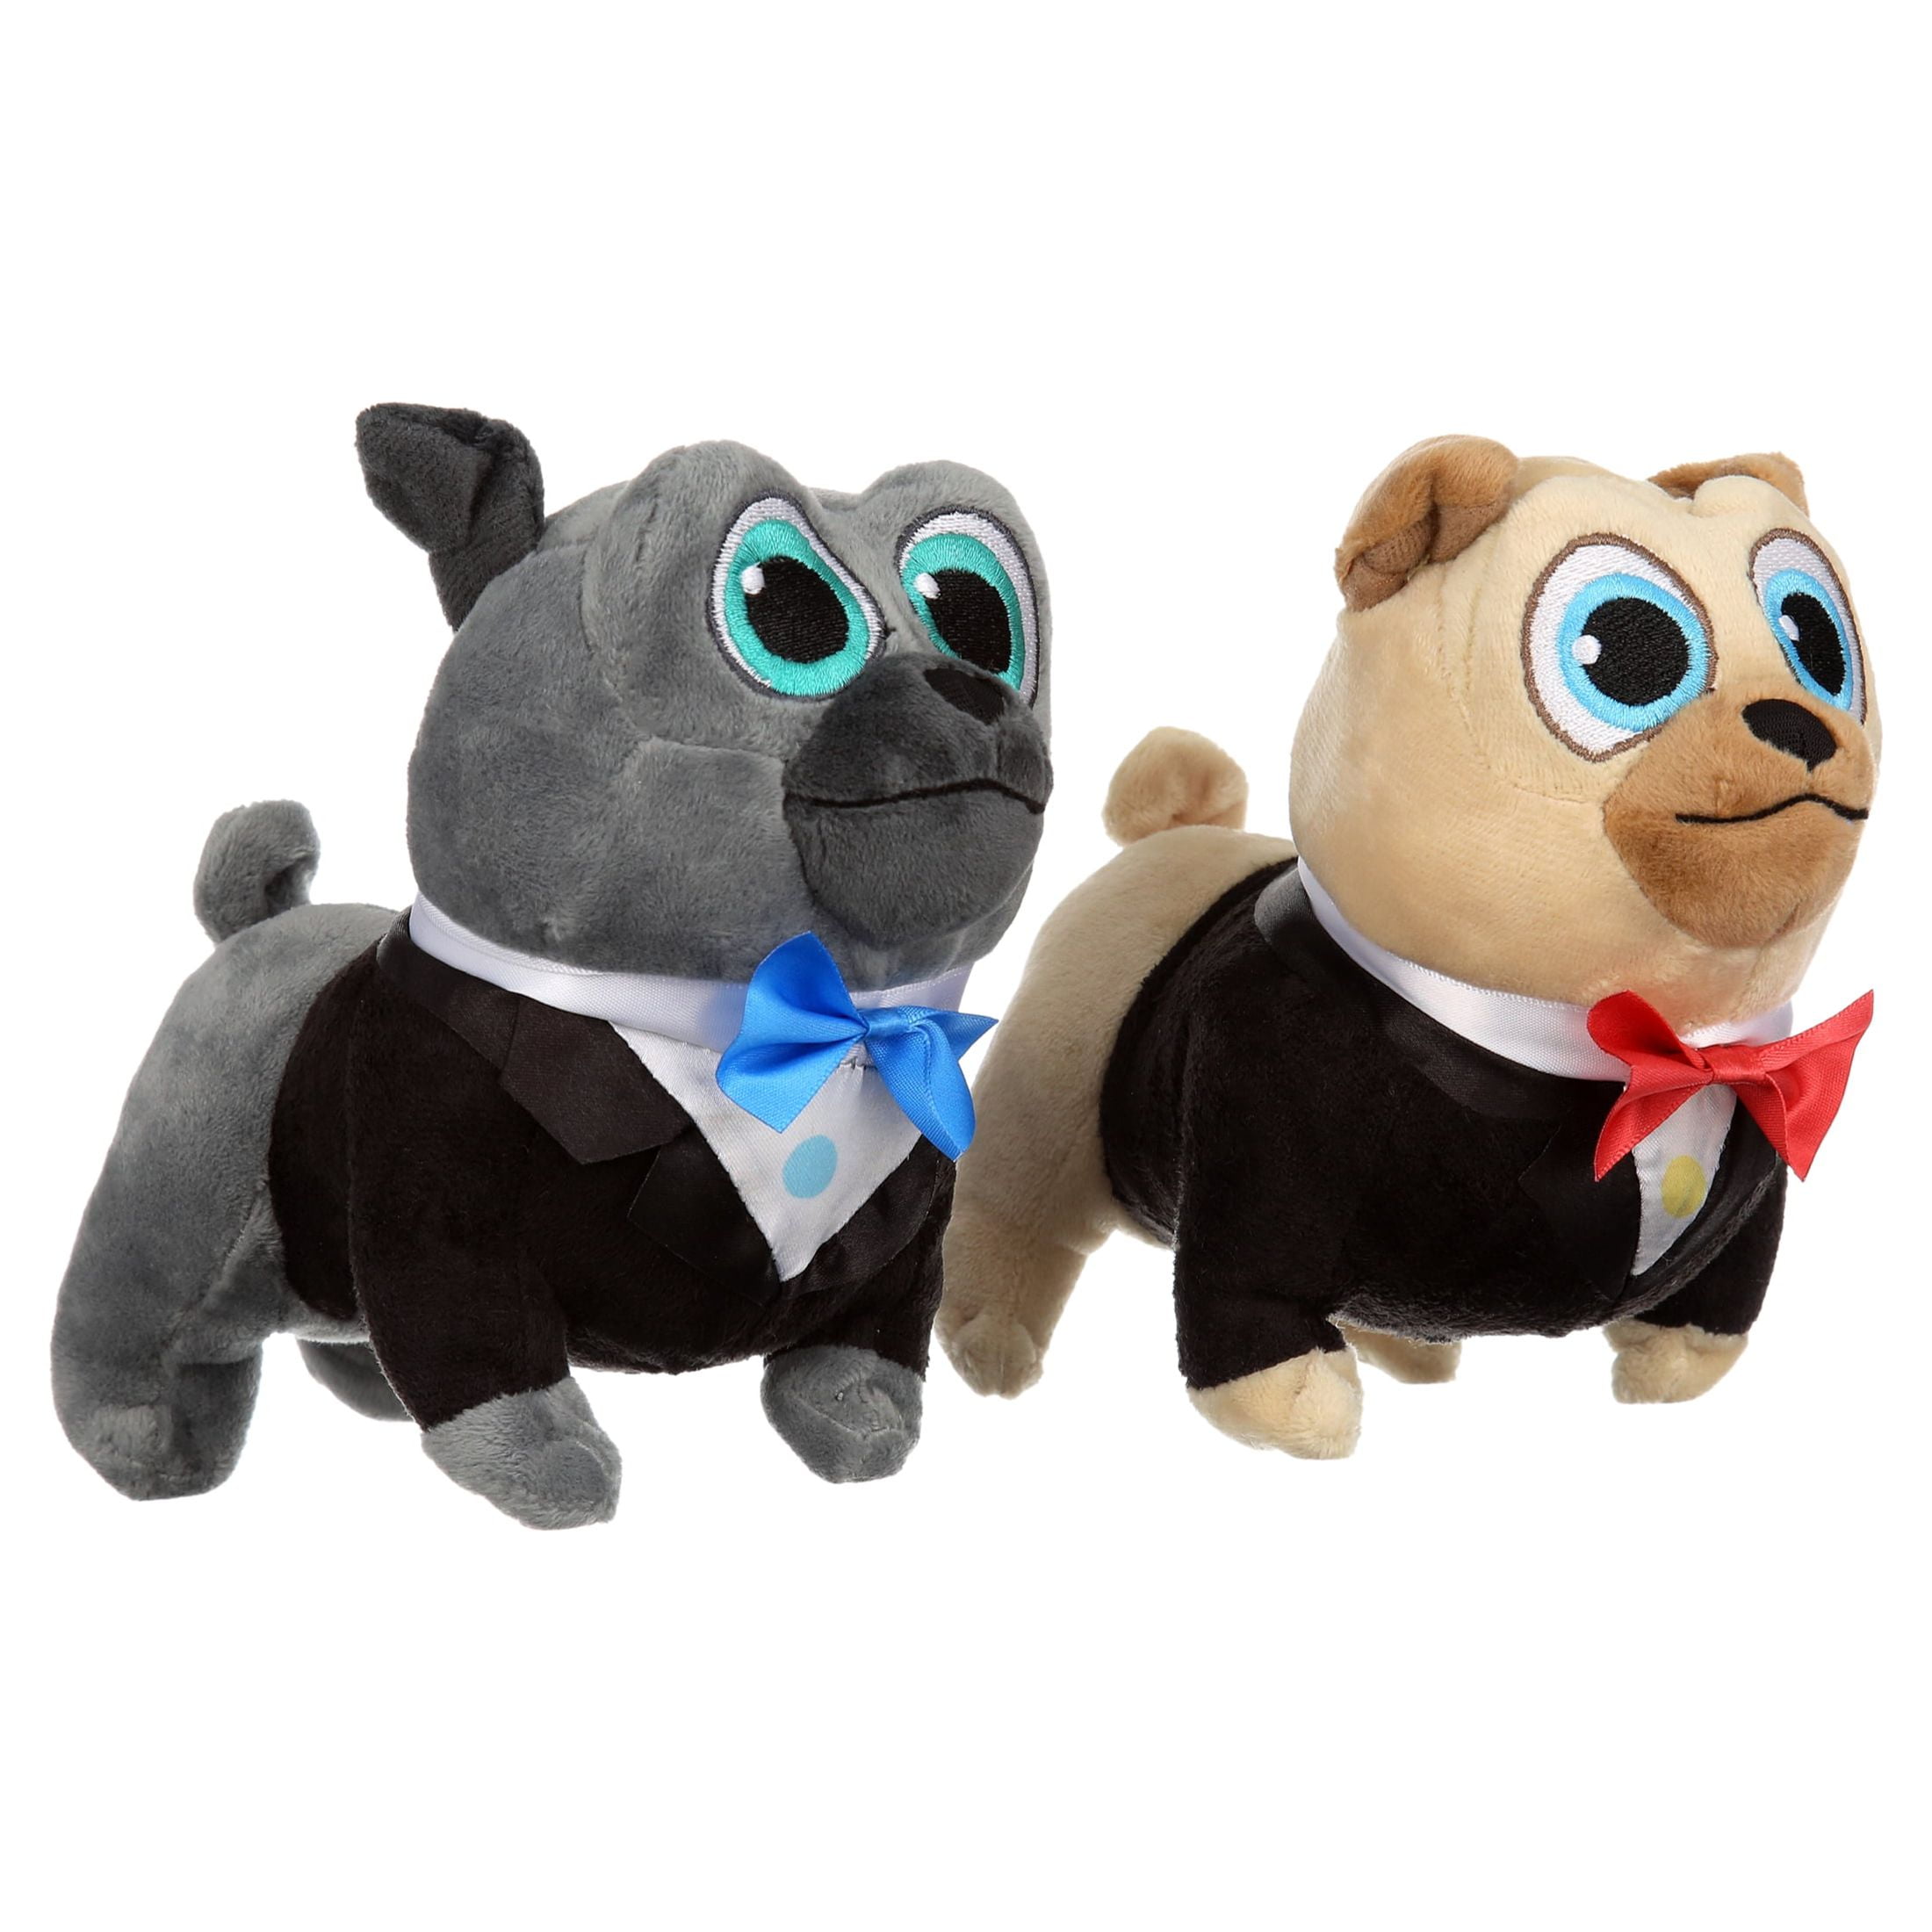 2-Count Puppy Dog Pals Small Plush Toy (Bingo & Rolly) $3.82 + Free S&H w/ Walmart+ or $35+